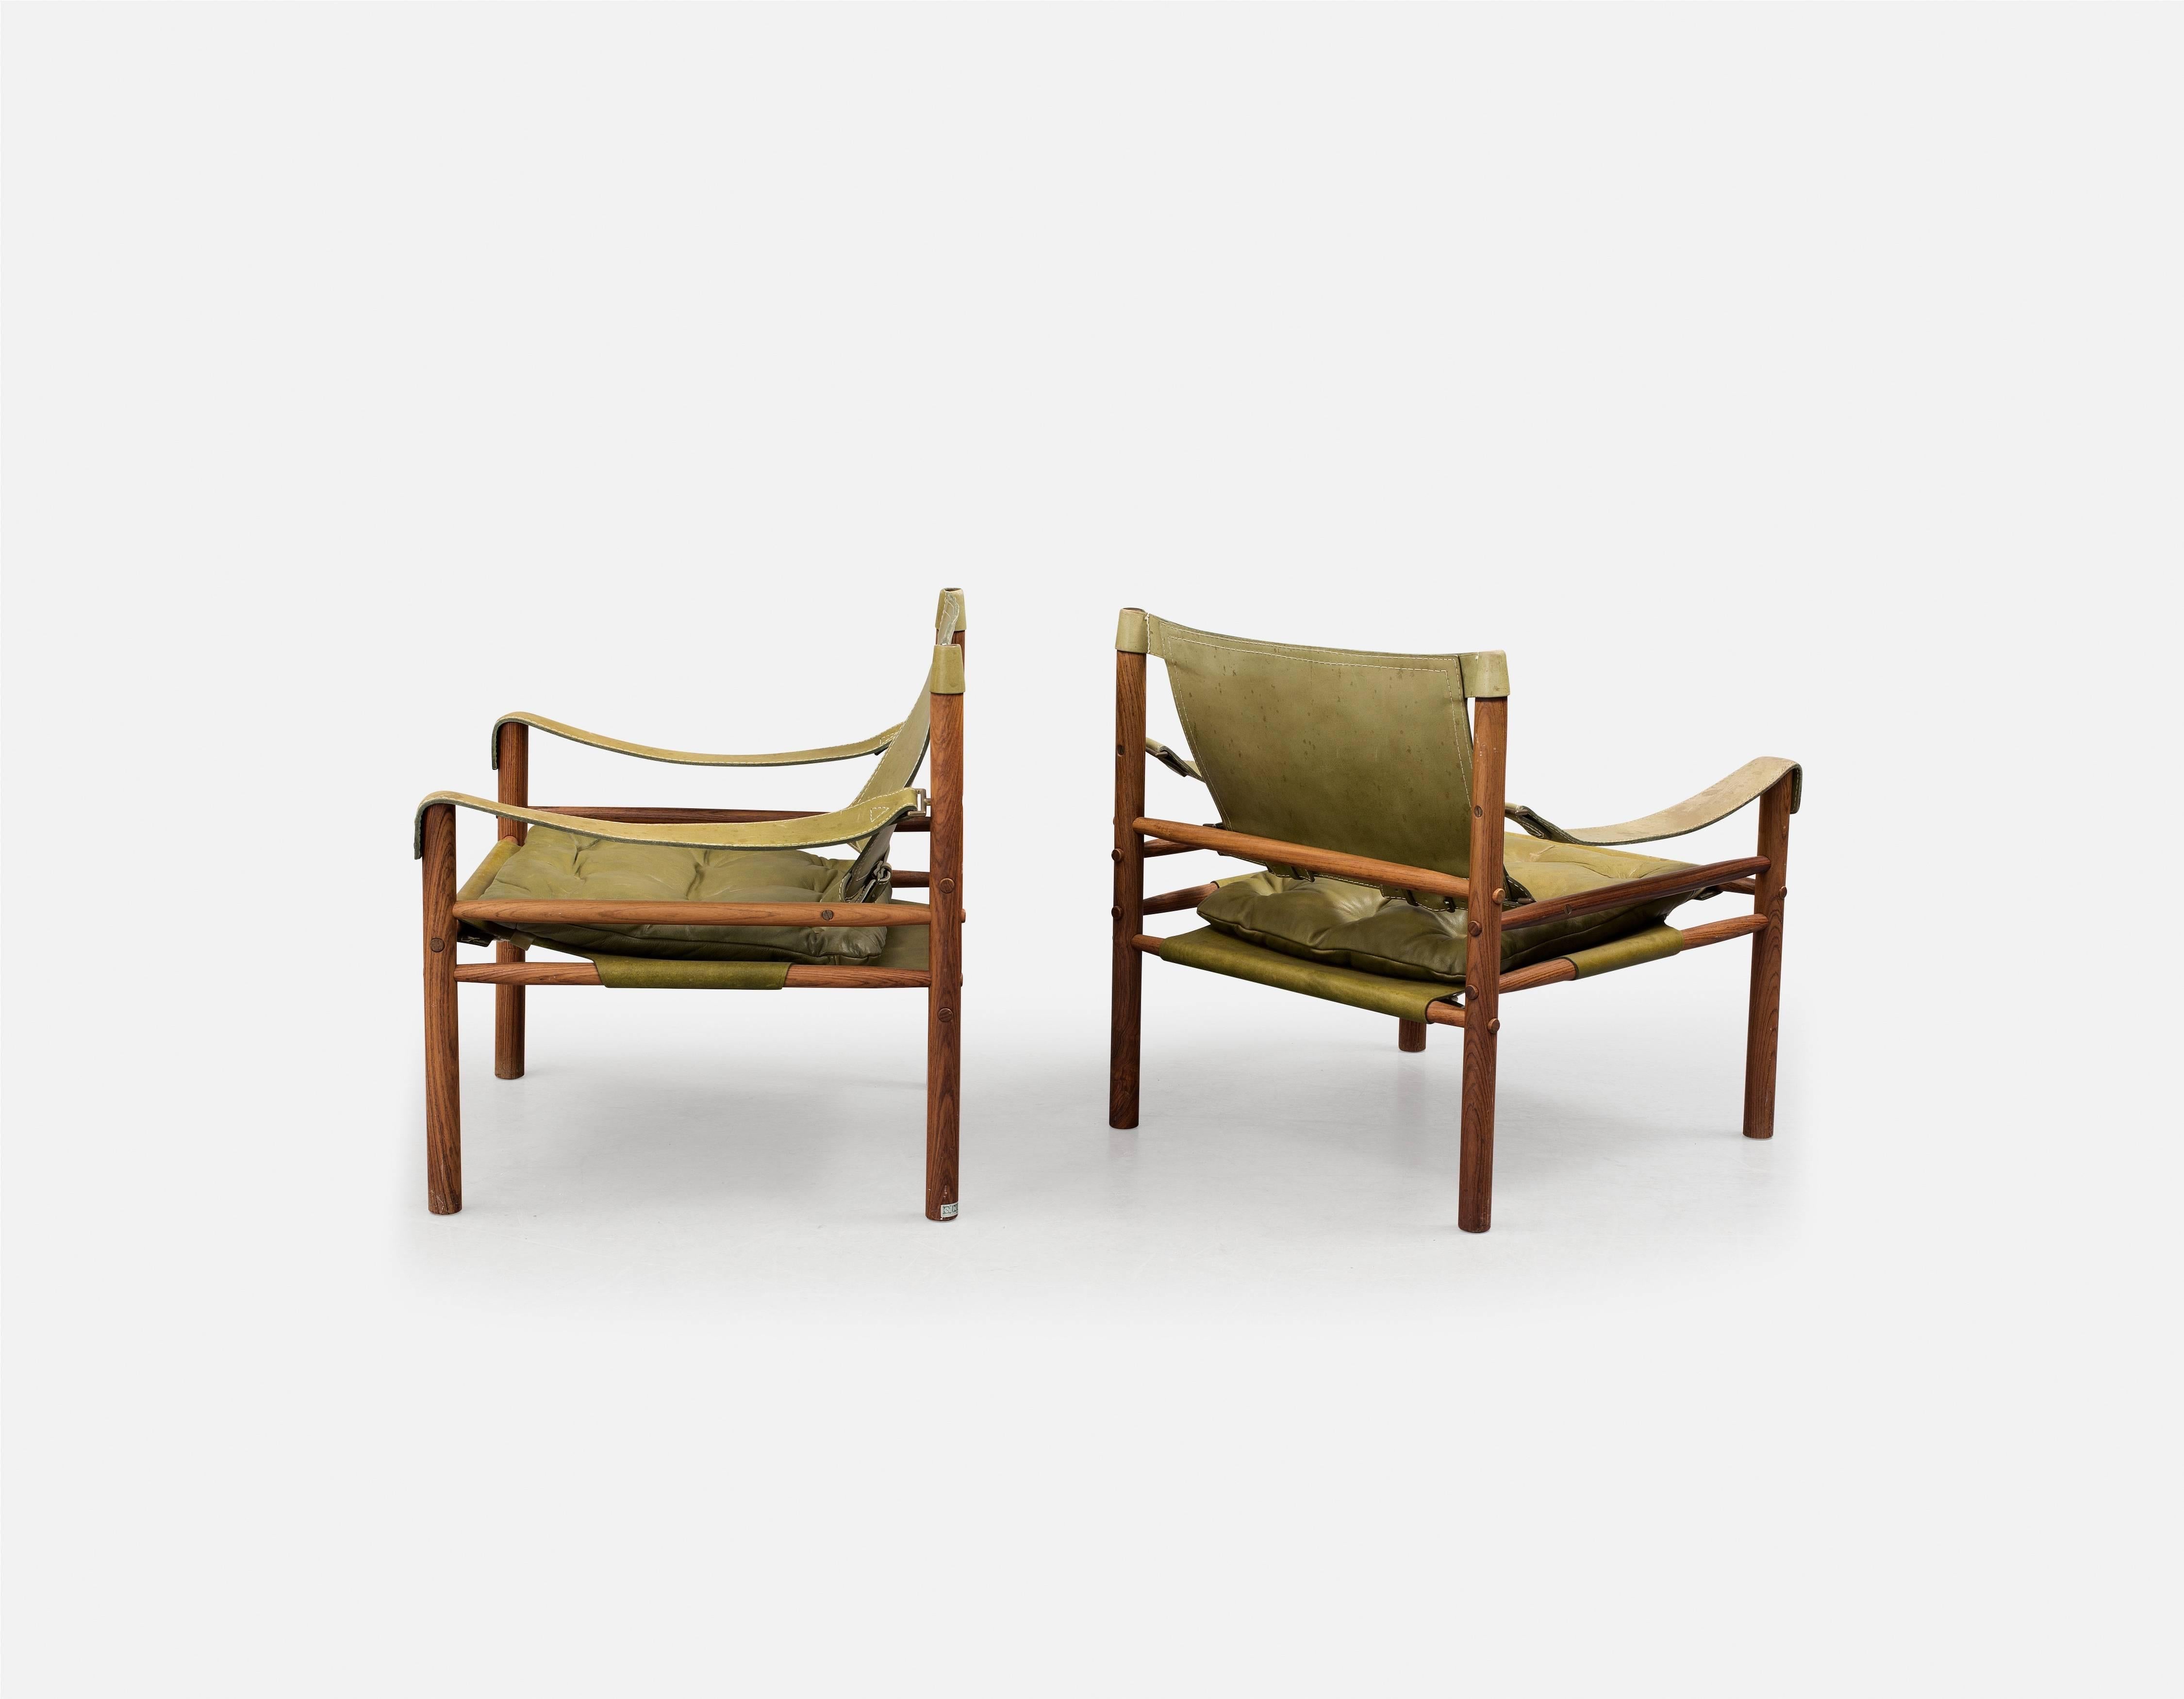 A beautiful original pair of Arne Norell safari sirocco chairs in rosewood and green leather, 1960s, Sweden. Made by Aneby Mobler, with makers label attached. Fast and inexpensive shipping worldwide.